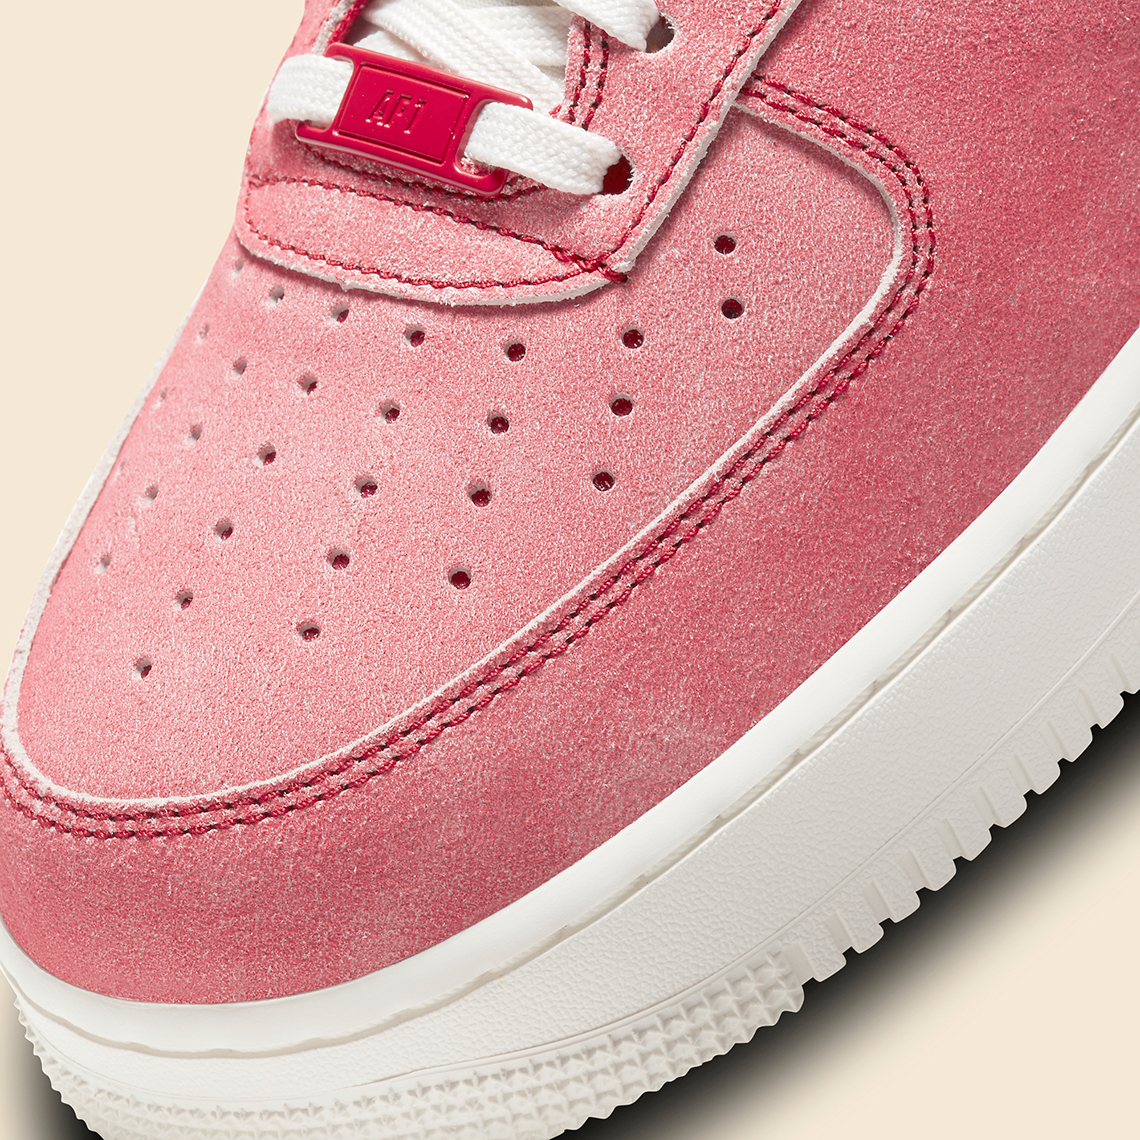 Nike Air Force 1 Low Dusty Suede Red Dh0265 600 7